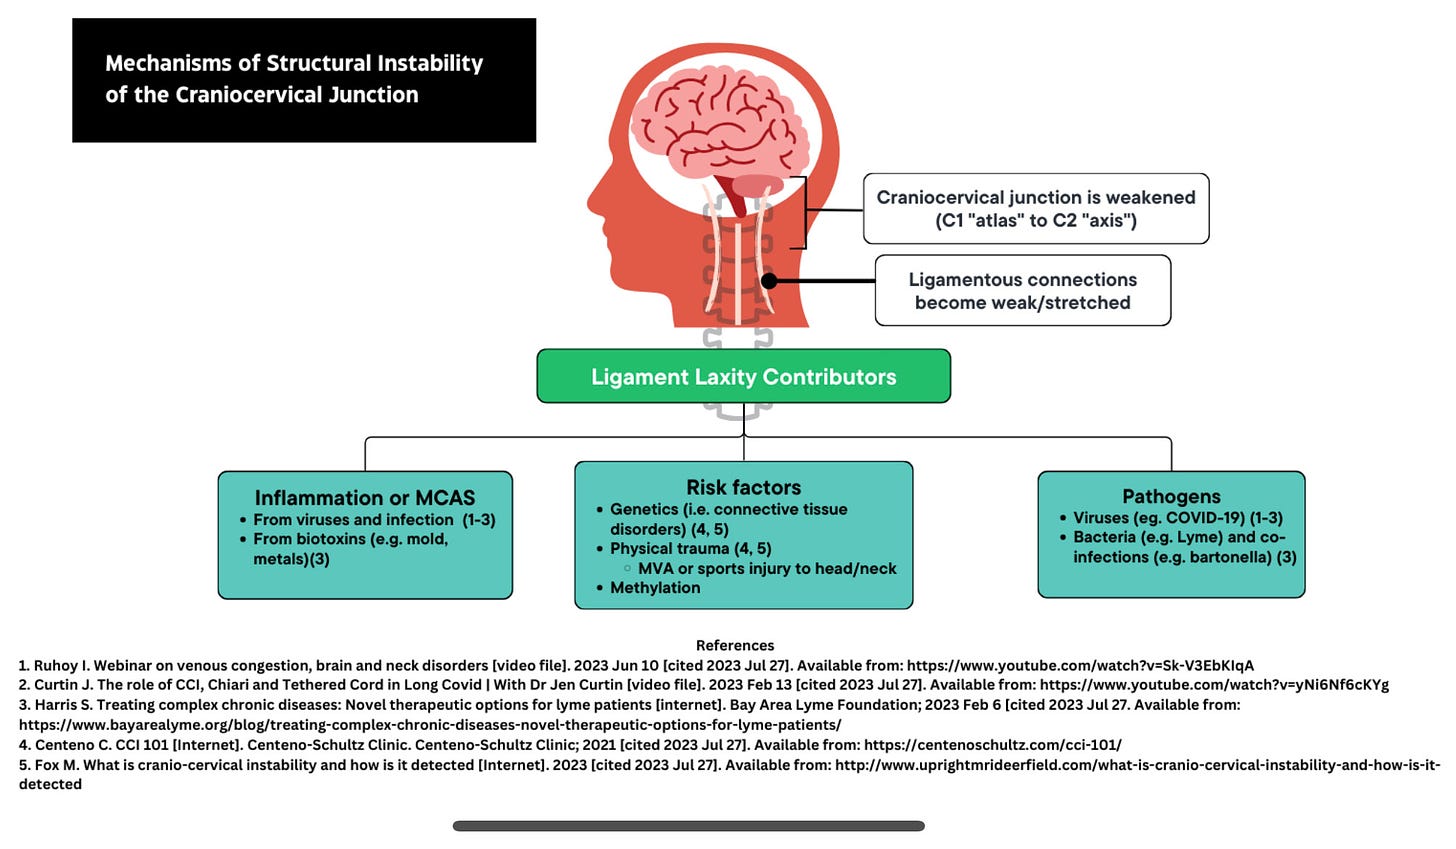 A diagram of Cranial Cervical Instability contributing factors, including inflammation, motor vehicle accidents, genetic predispositions, and pathogen infections. 